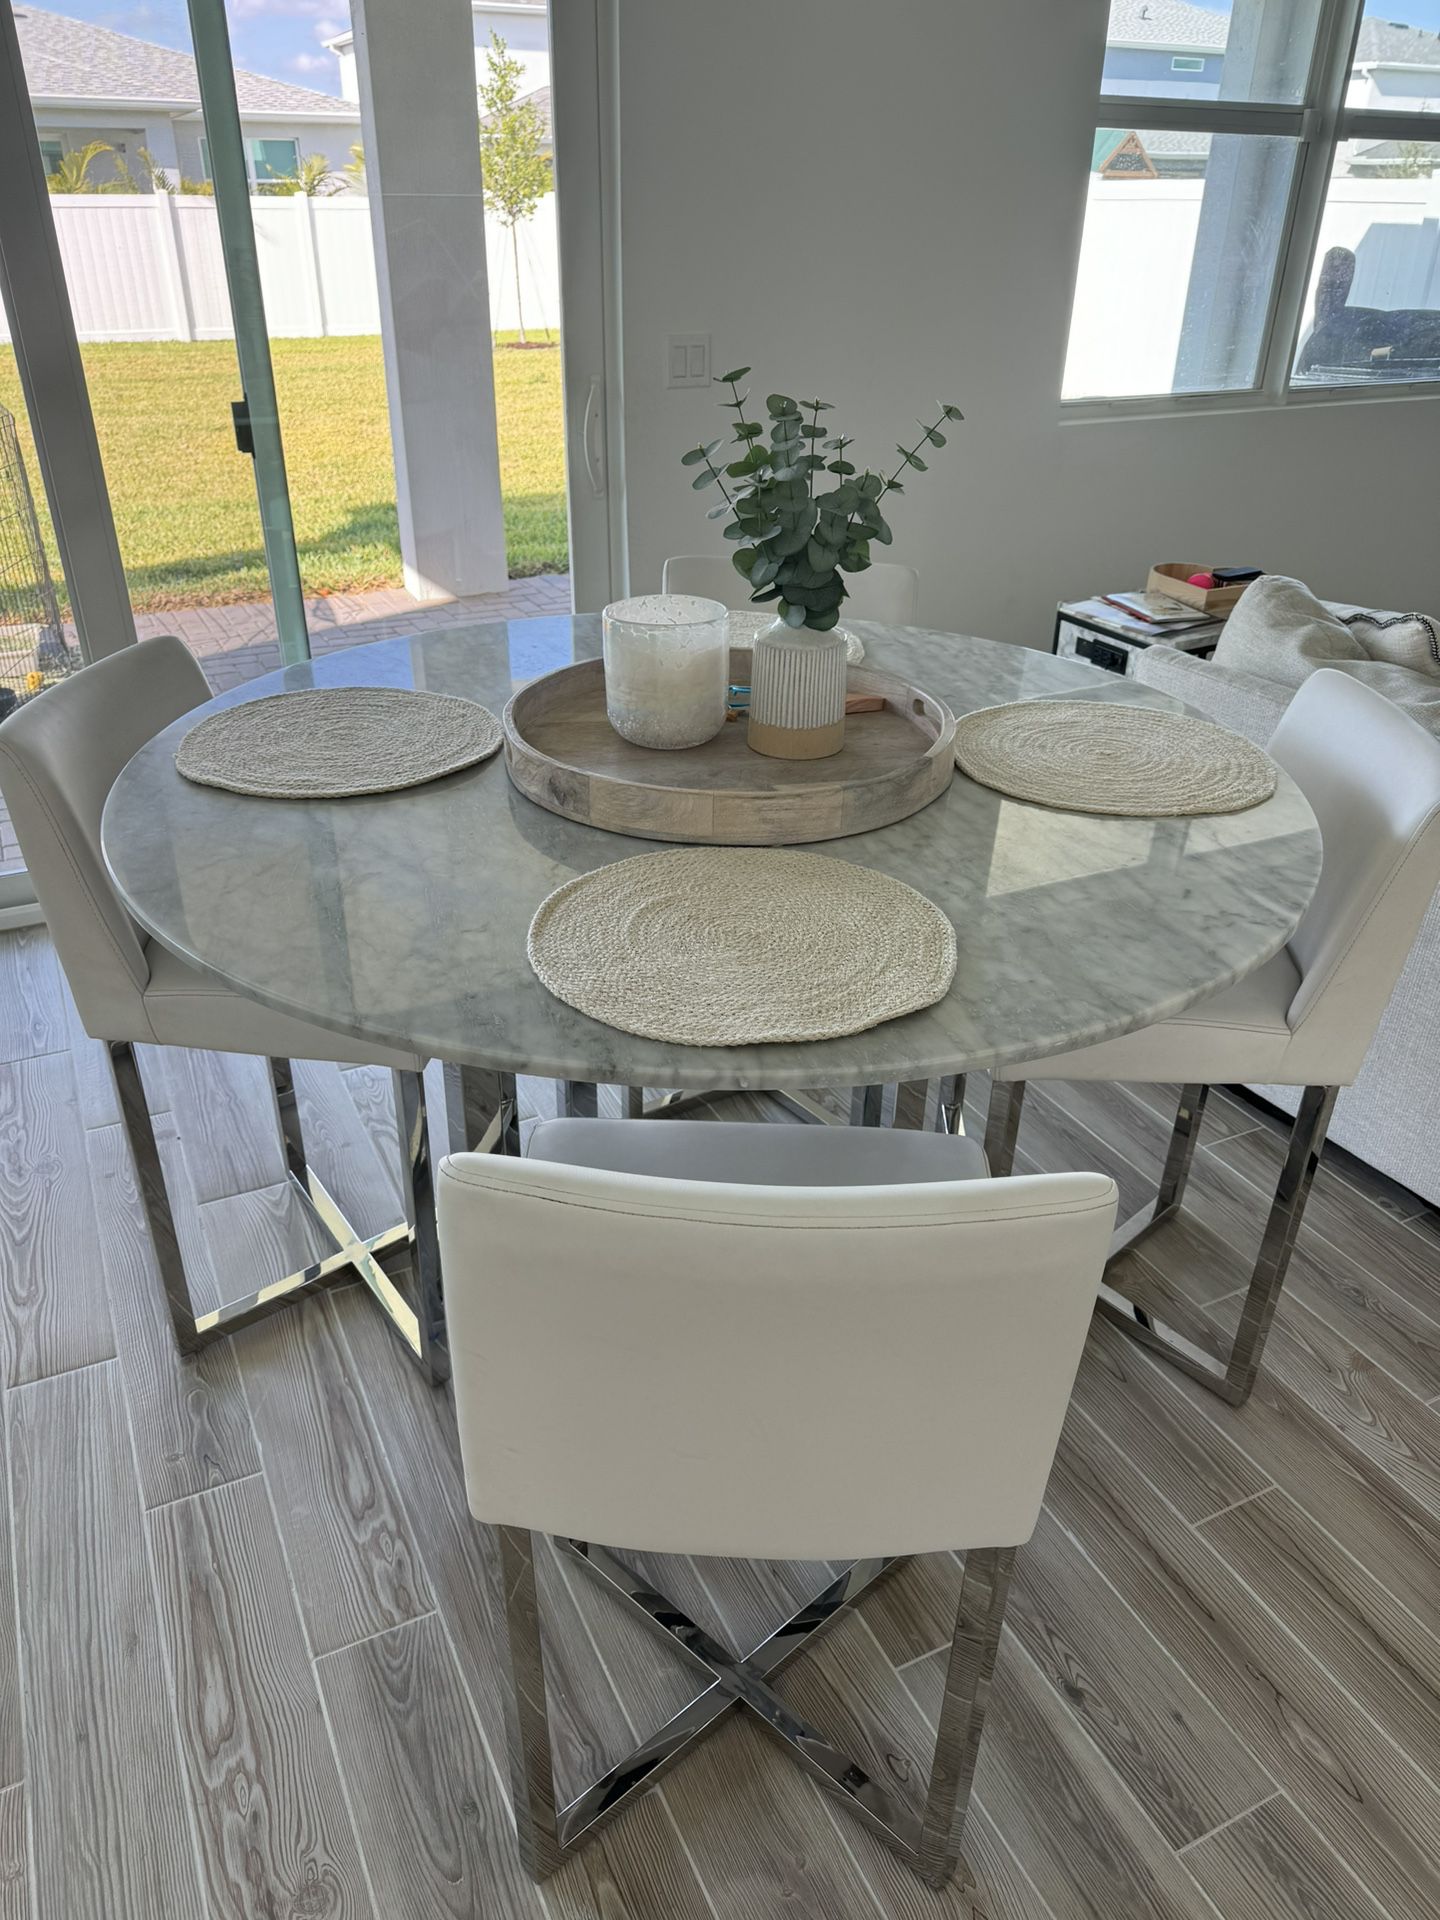 City Furniture Round Table